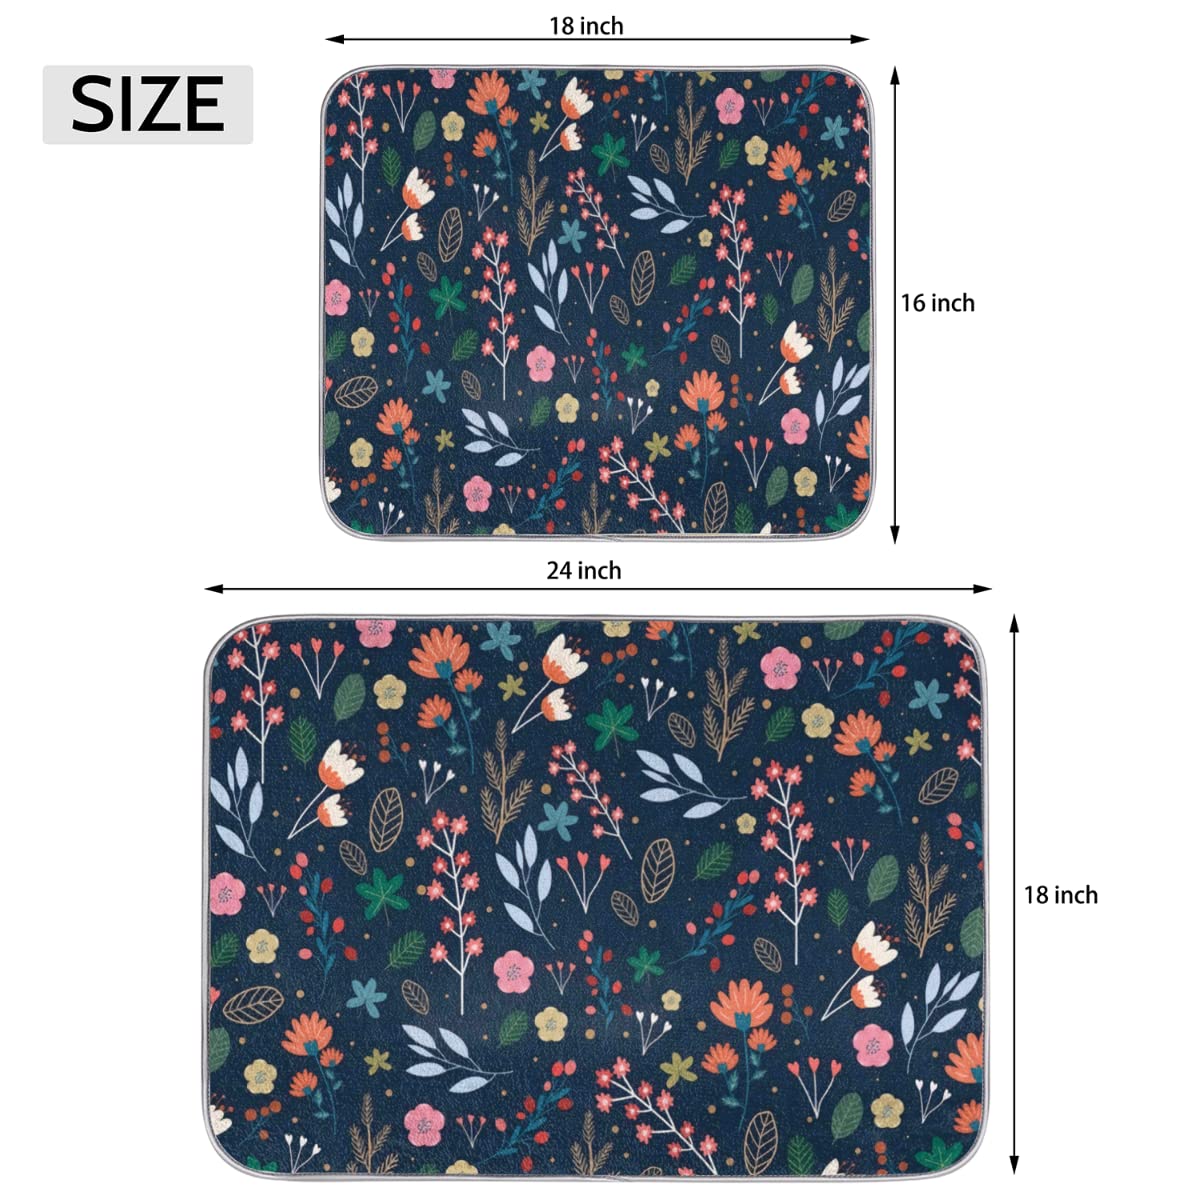 Colorful Flowers Dish Drying Mat for Kitchen Counter 16 x 18, Spring Summer Floral Absorbent Reversible Microfiber Dishes Drainer Mats, Washable Drying Pads for Sinks